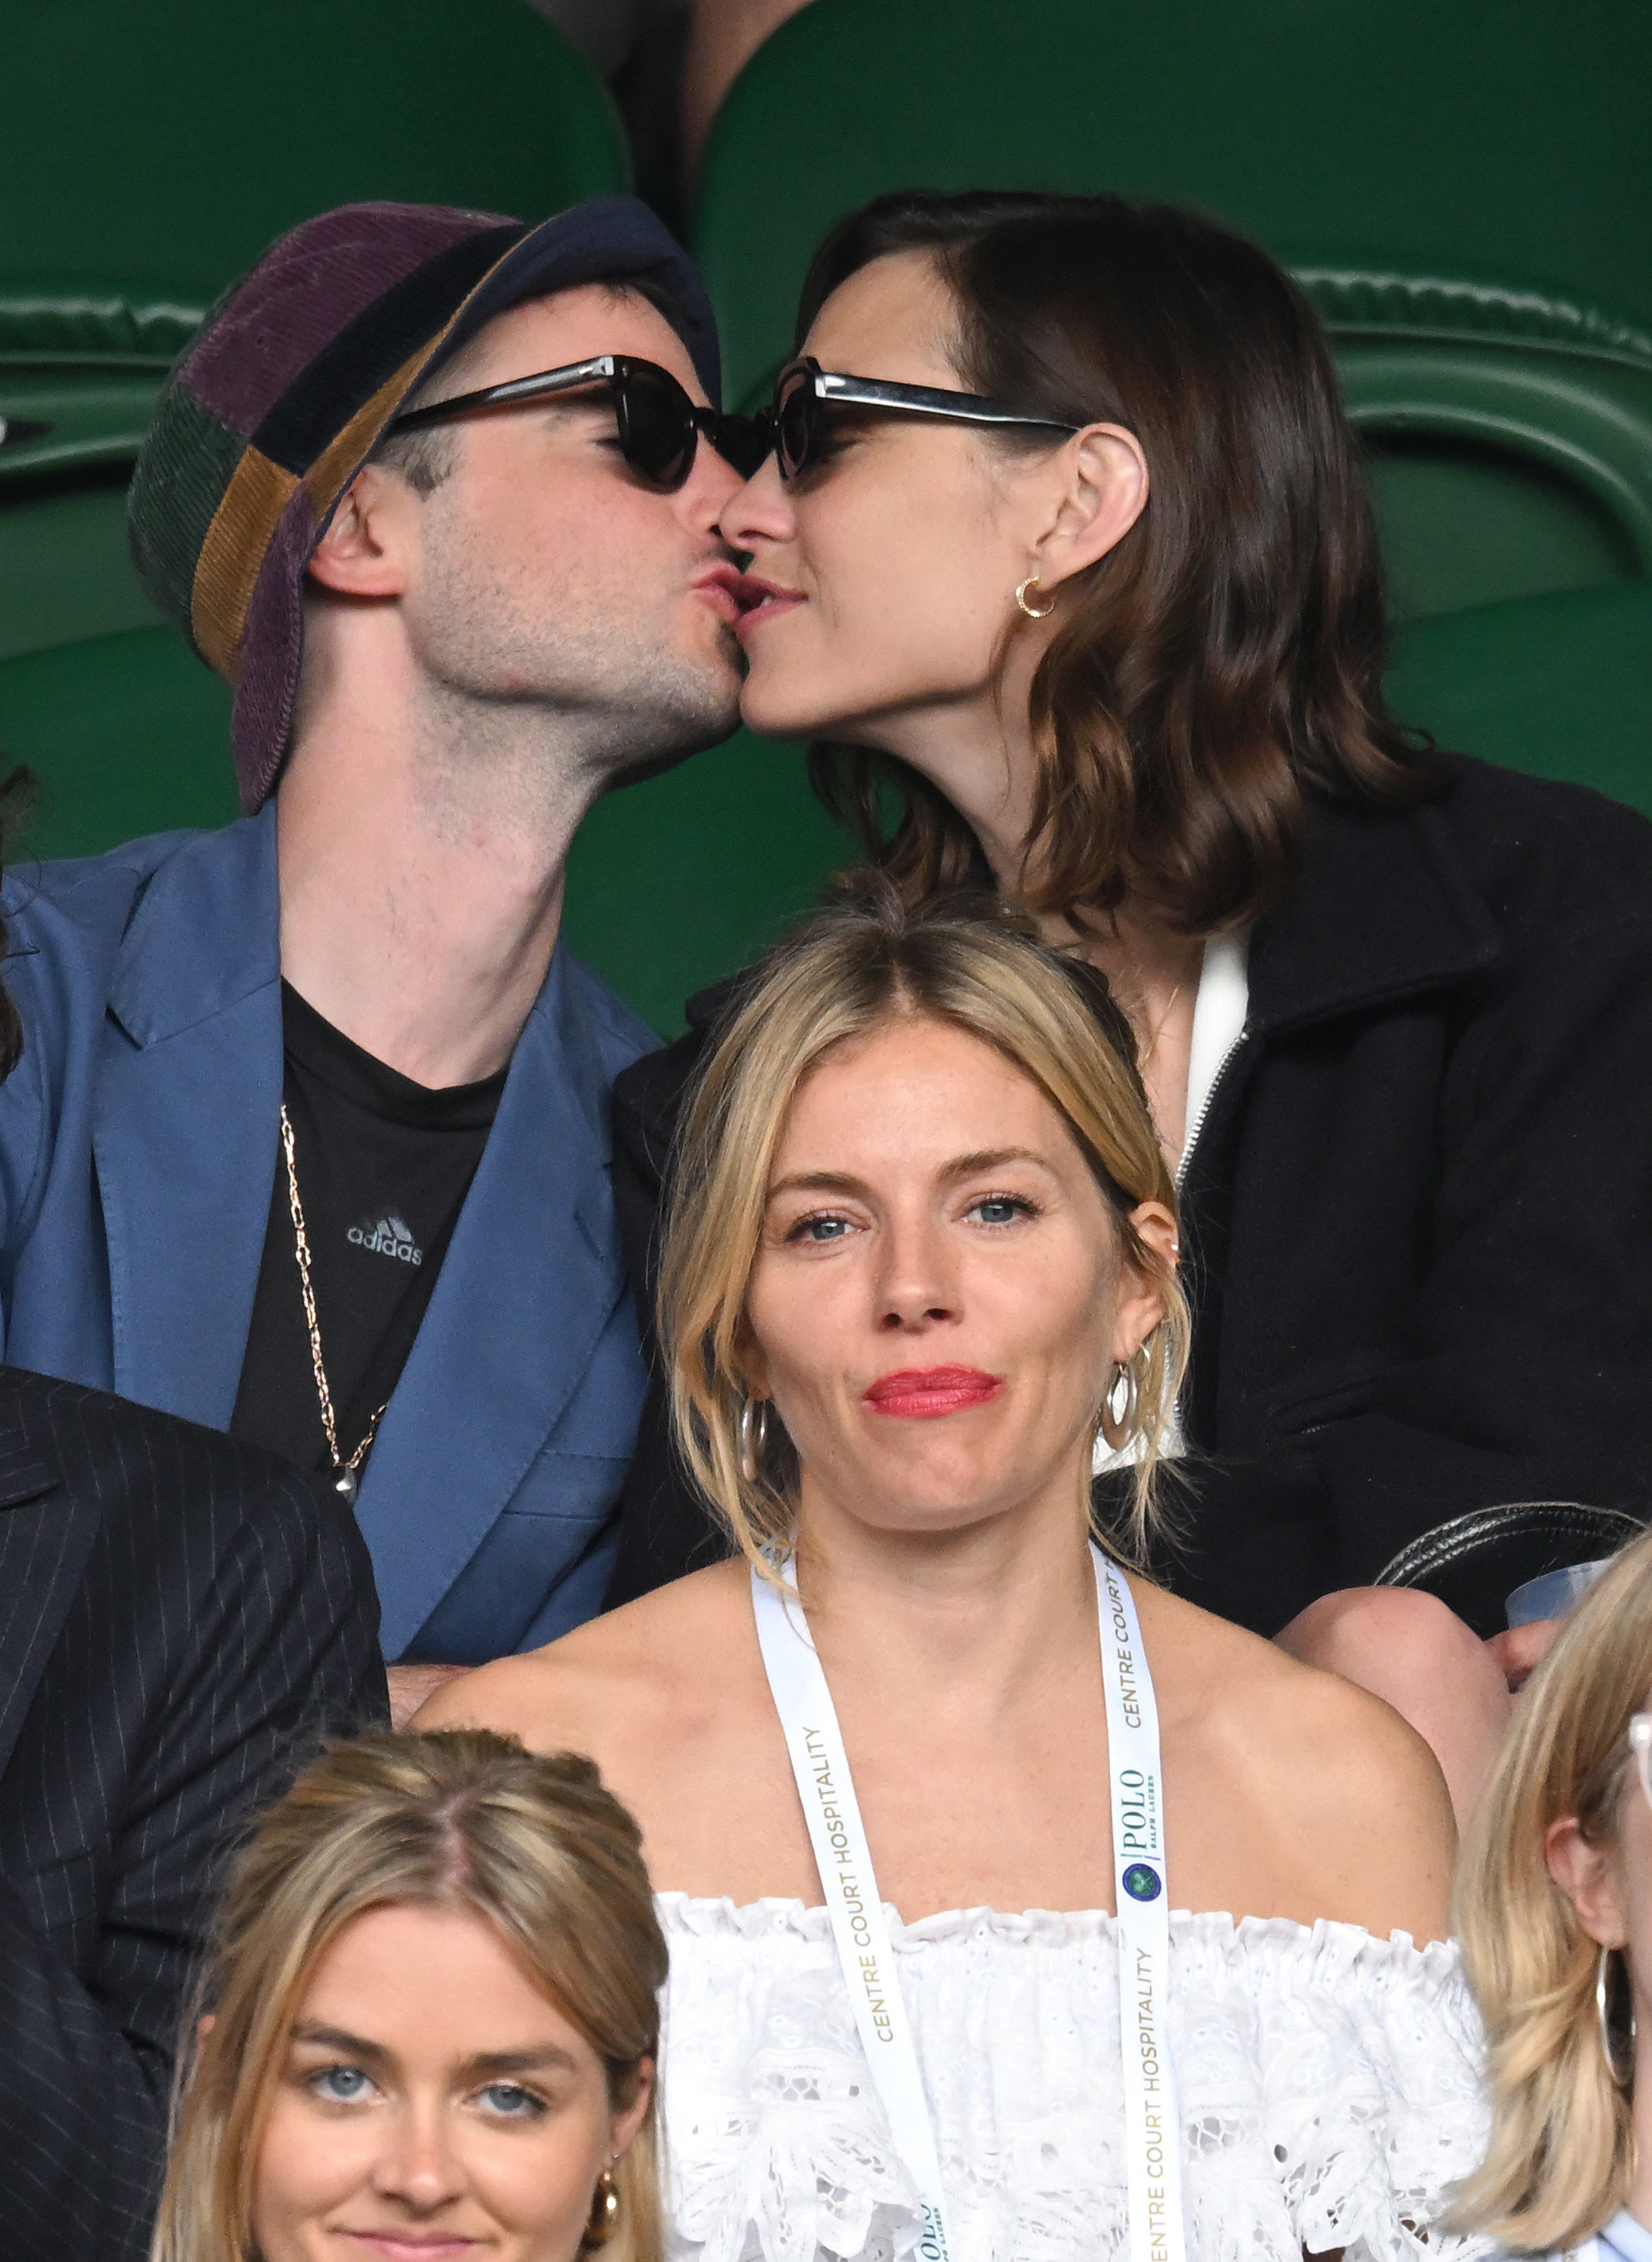 Tom and alexa kissing while sienna sits in a row in front of them